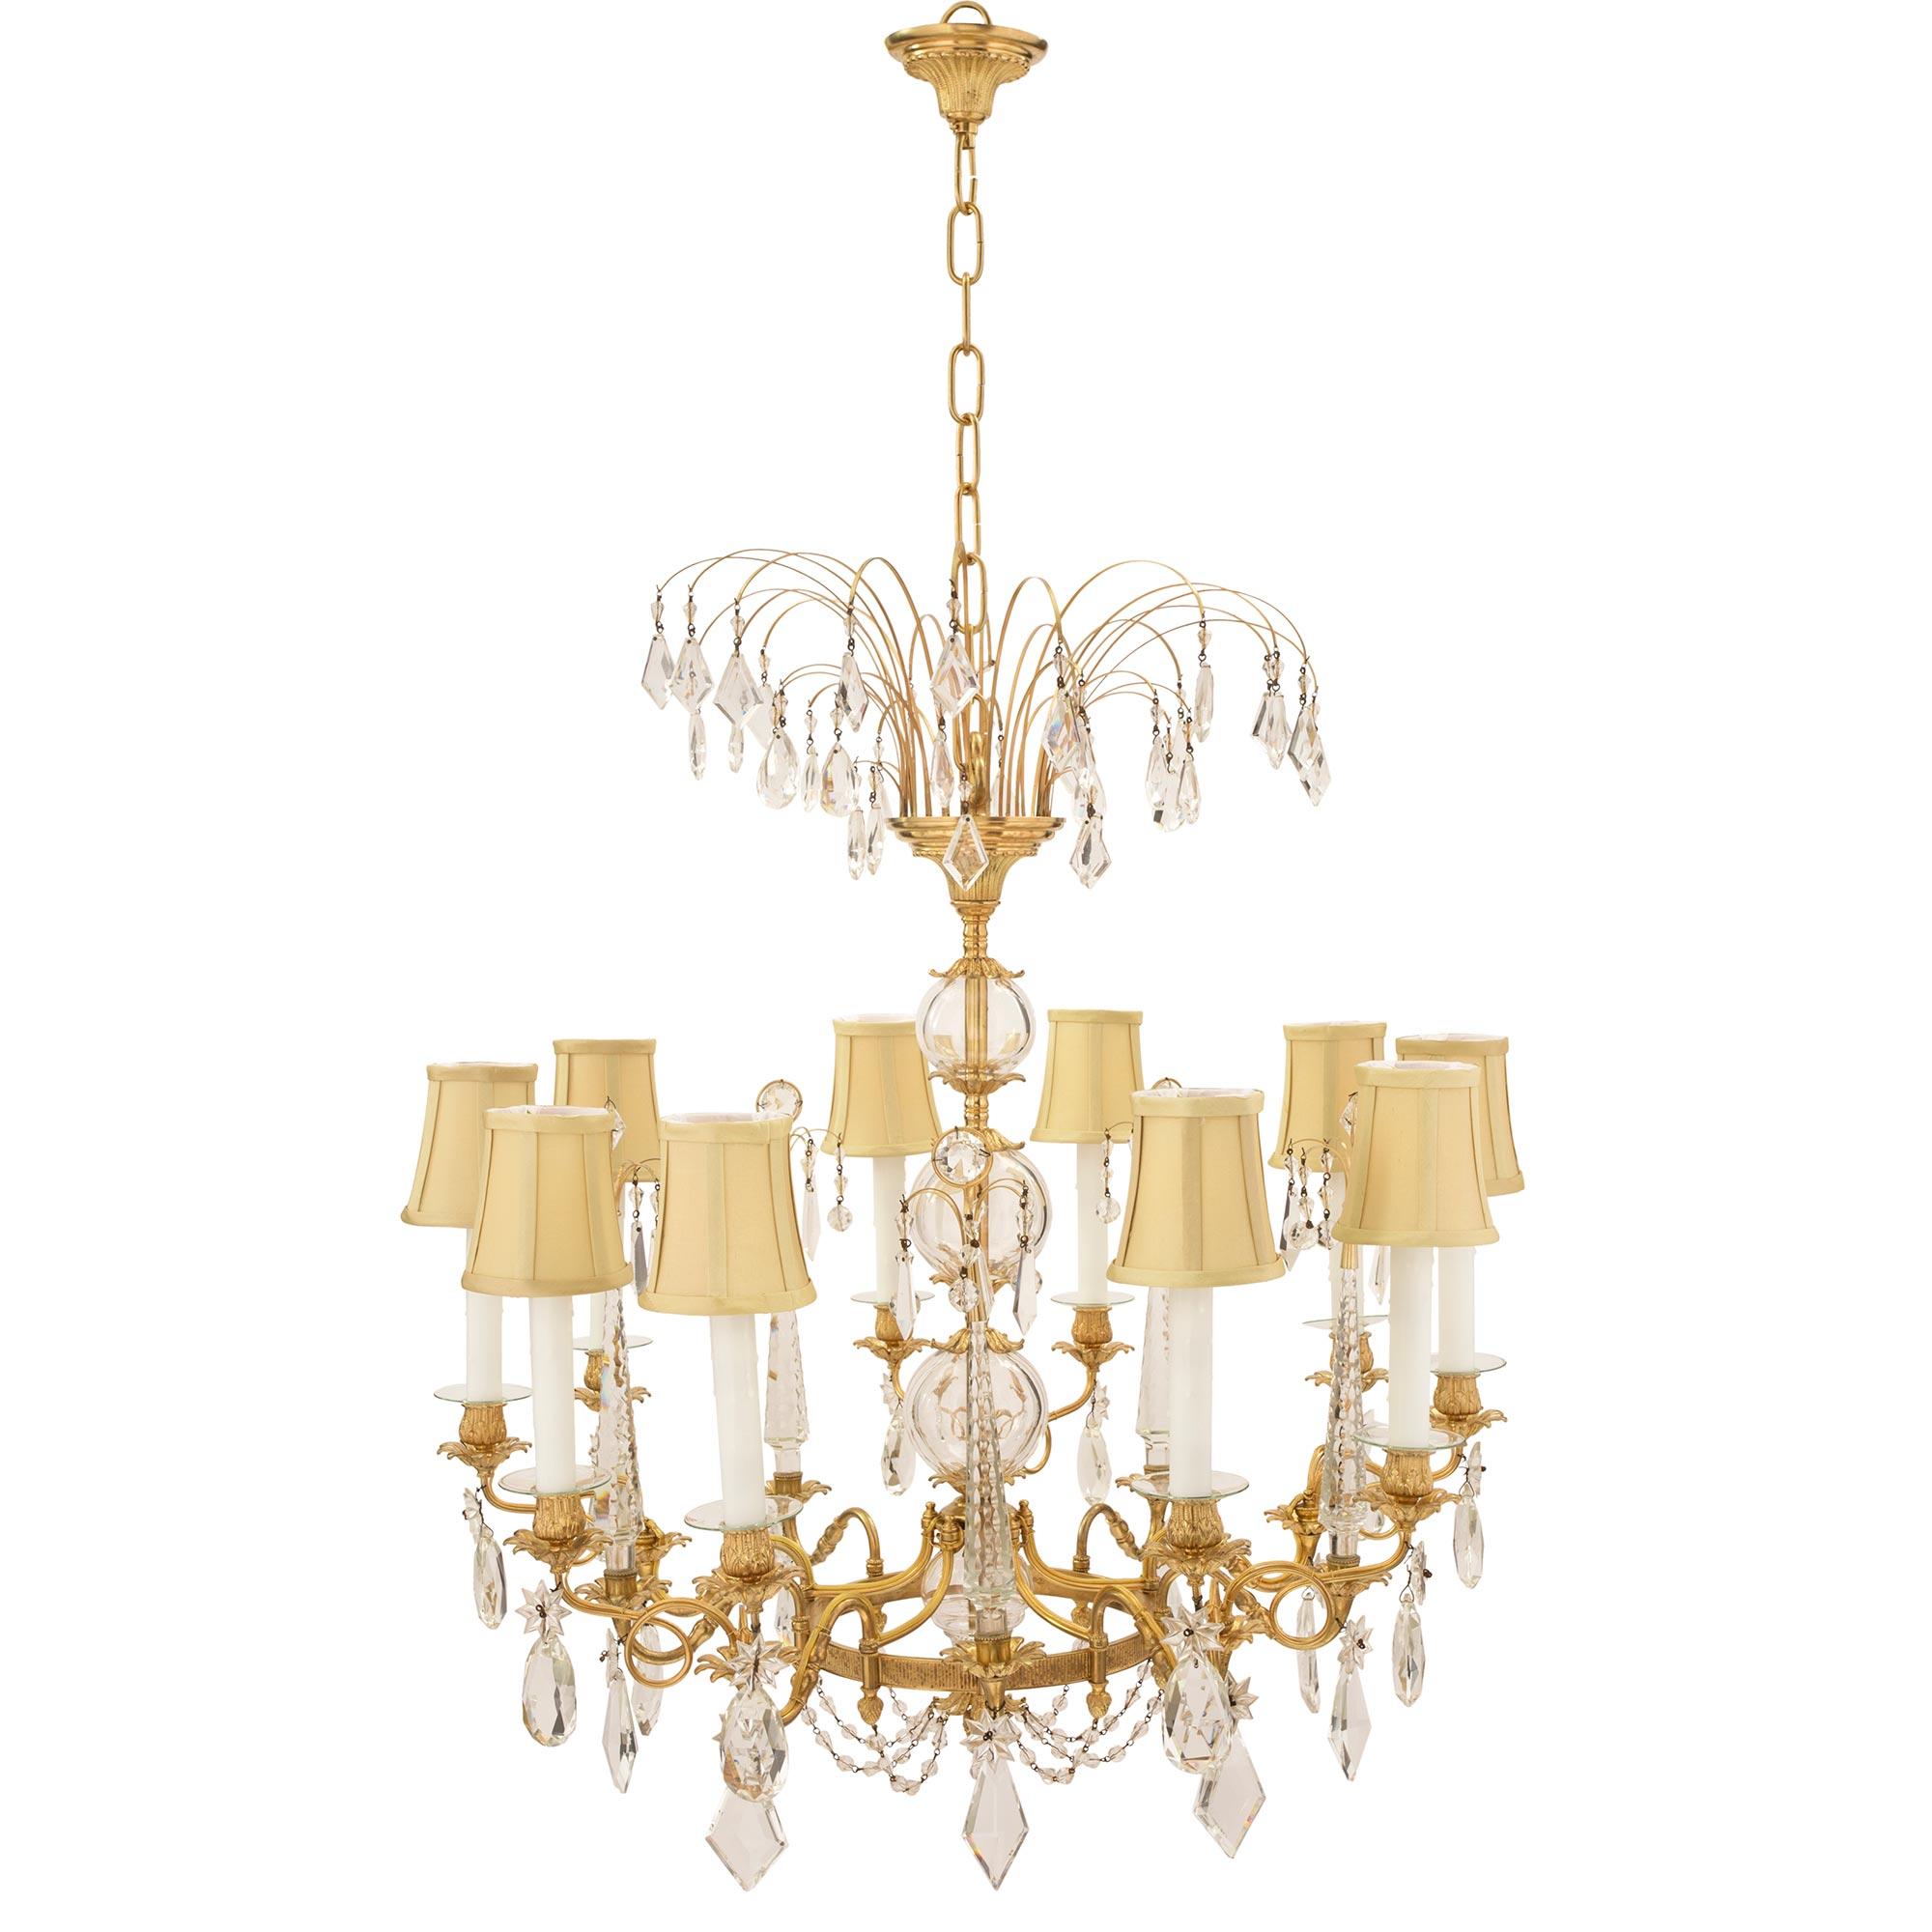 A stunning Russian 19th century Neo-Classical st. ormolu and crystal chandelier, in the manner of Johan Zekh, one of Saint-Petersburg’s most celebrated masters. This ten light chandelier has a remarkable crystal encased central fut, accented with